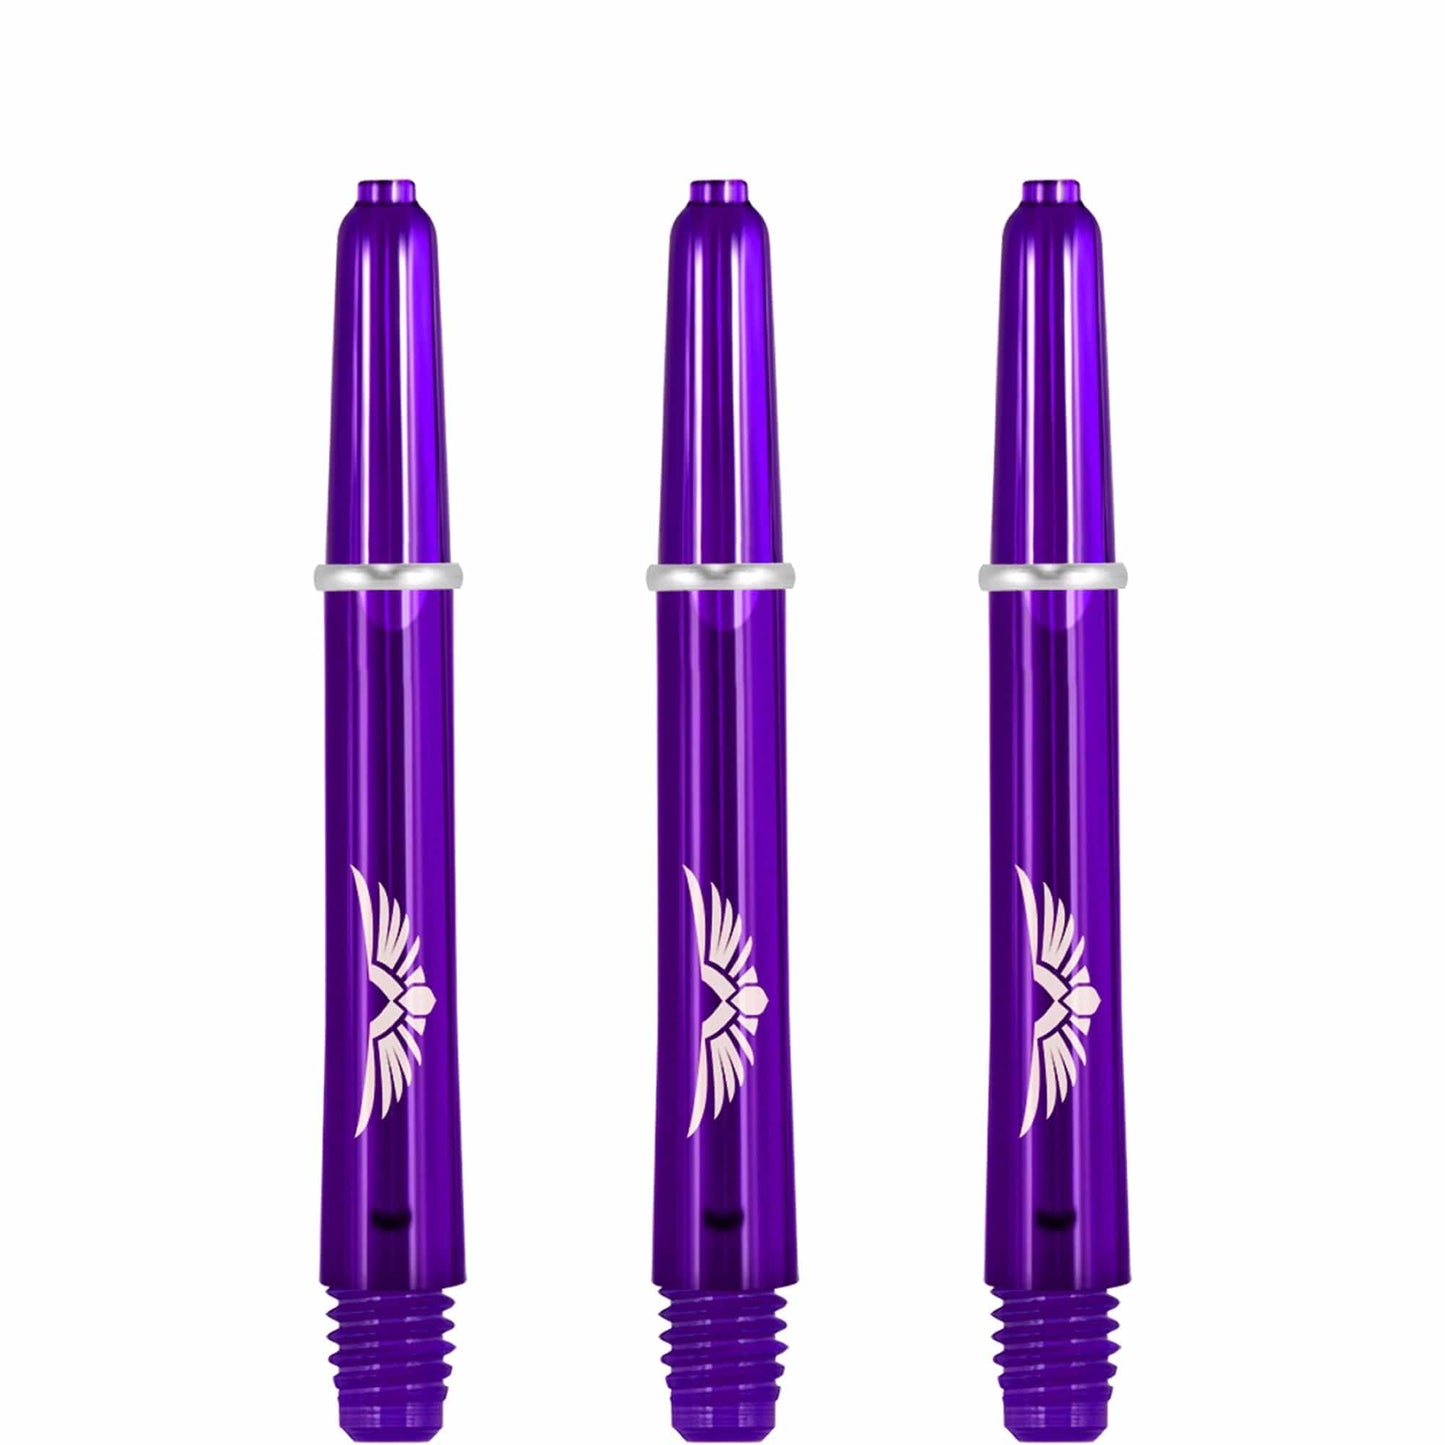 Shot Eagle Claw Dart Shafts - with Machined Rings - Strong Polycarbonate Stems - Purple Tweenie